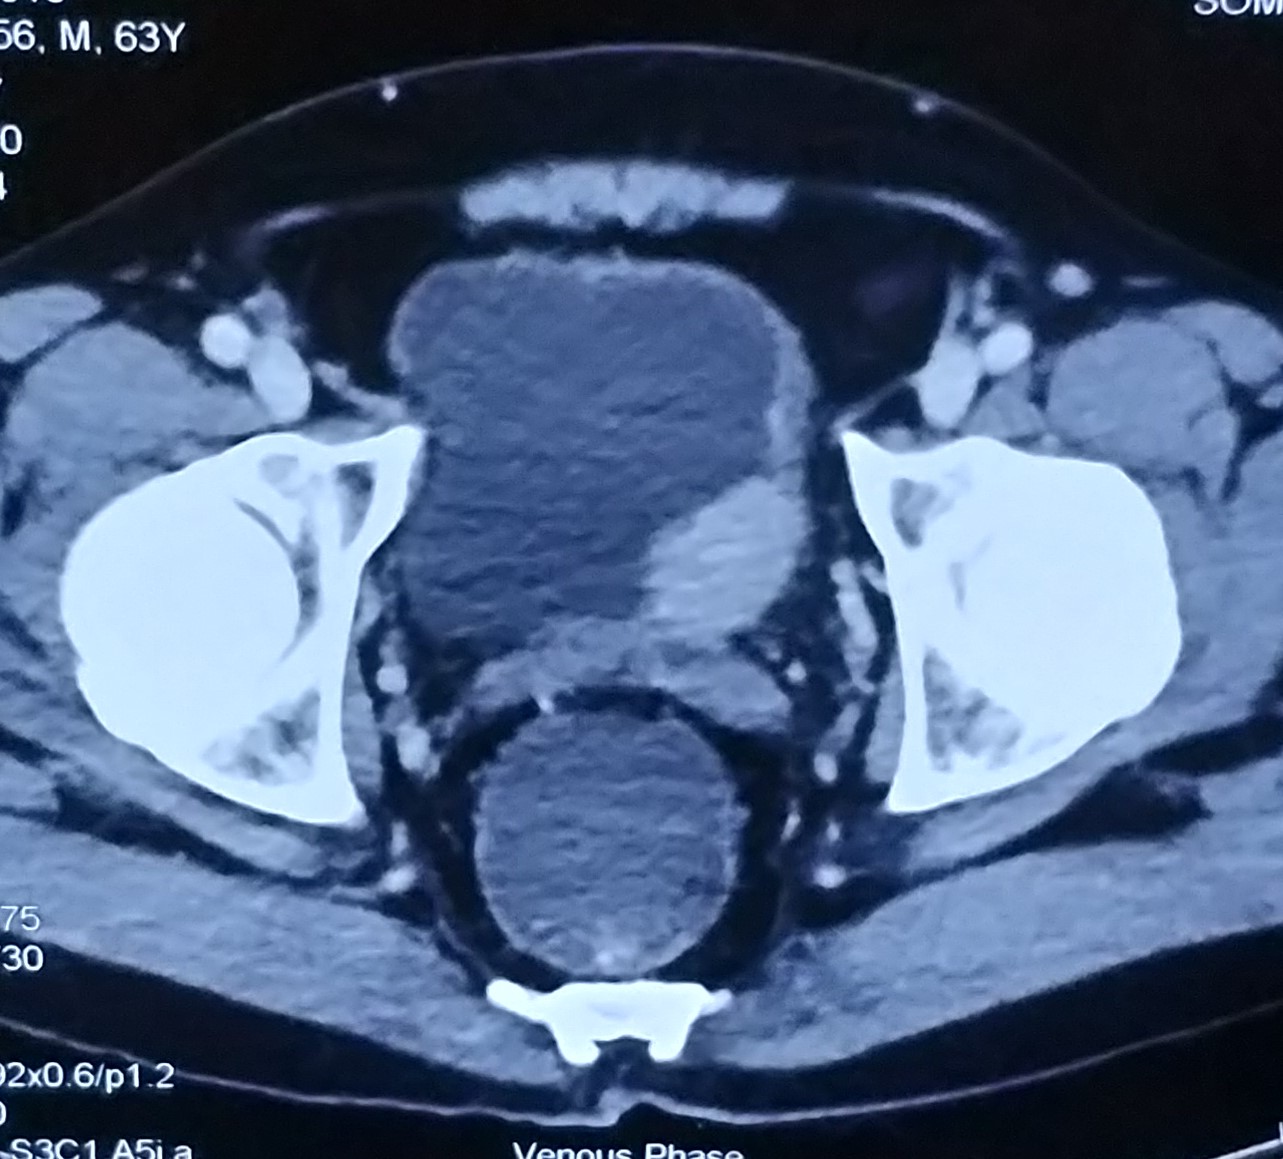 Bladder cancer ct-scan done by Dr. Varun V. Agarwal, Best Uro-Oncologist and Robotic Surgeon in Vashi, Navi Mumbai.